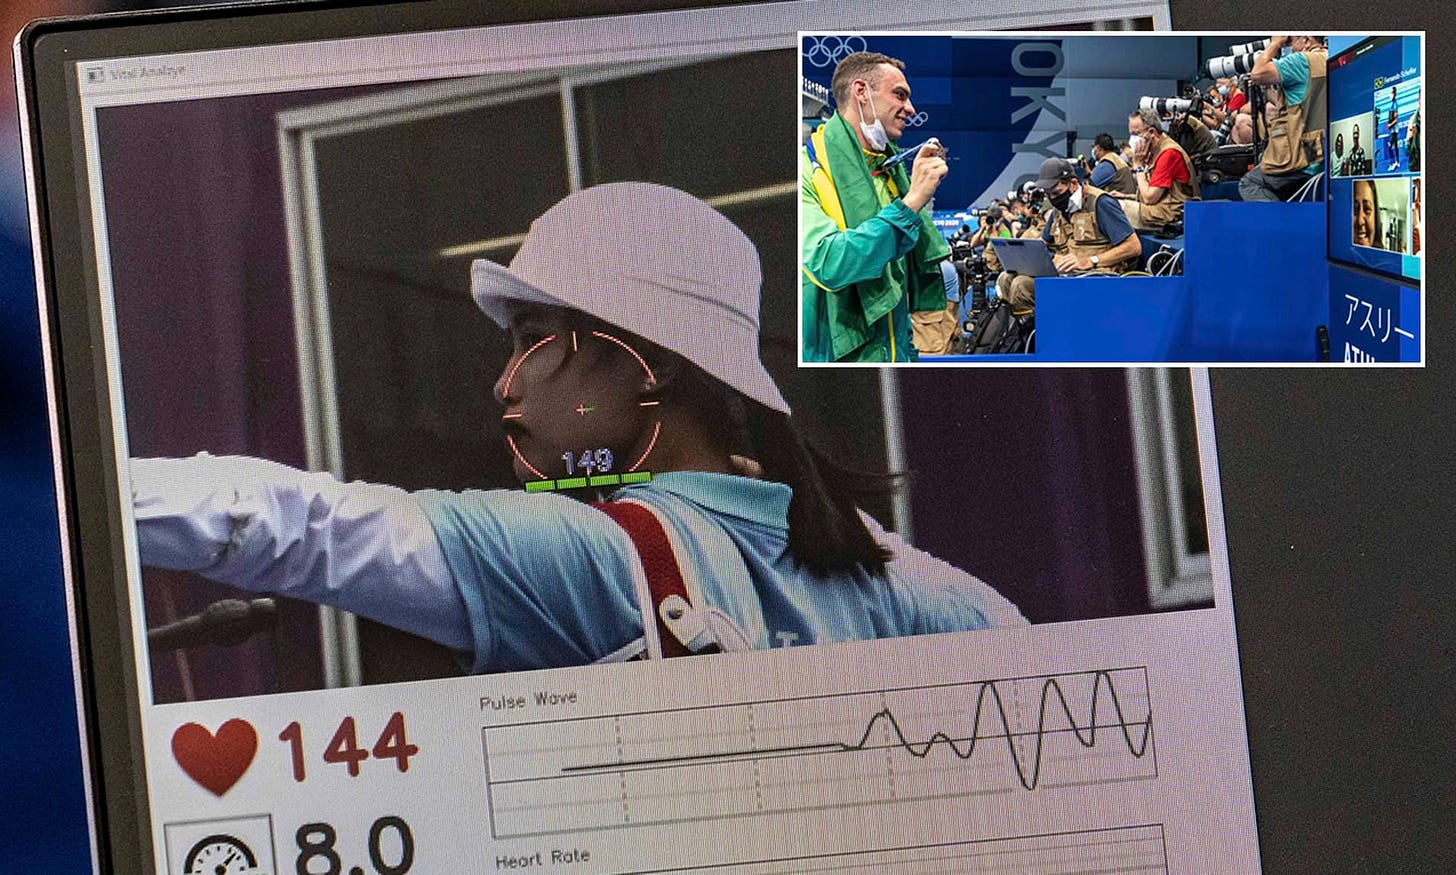 New tech at the Olympics allows TV viewers to track heart rates of nervous  athletes | Daily Mail Online